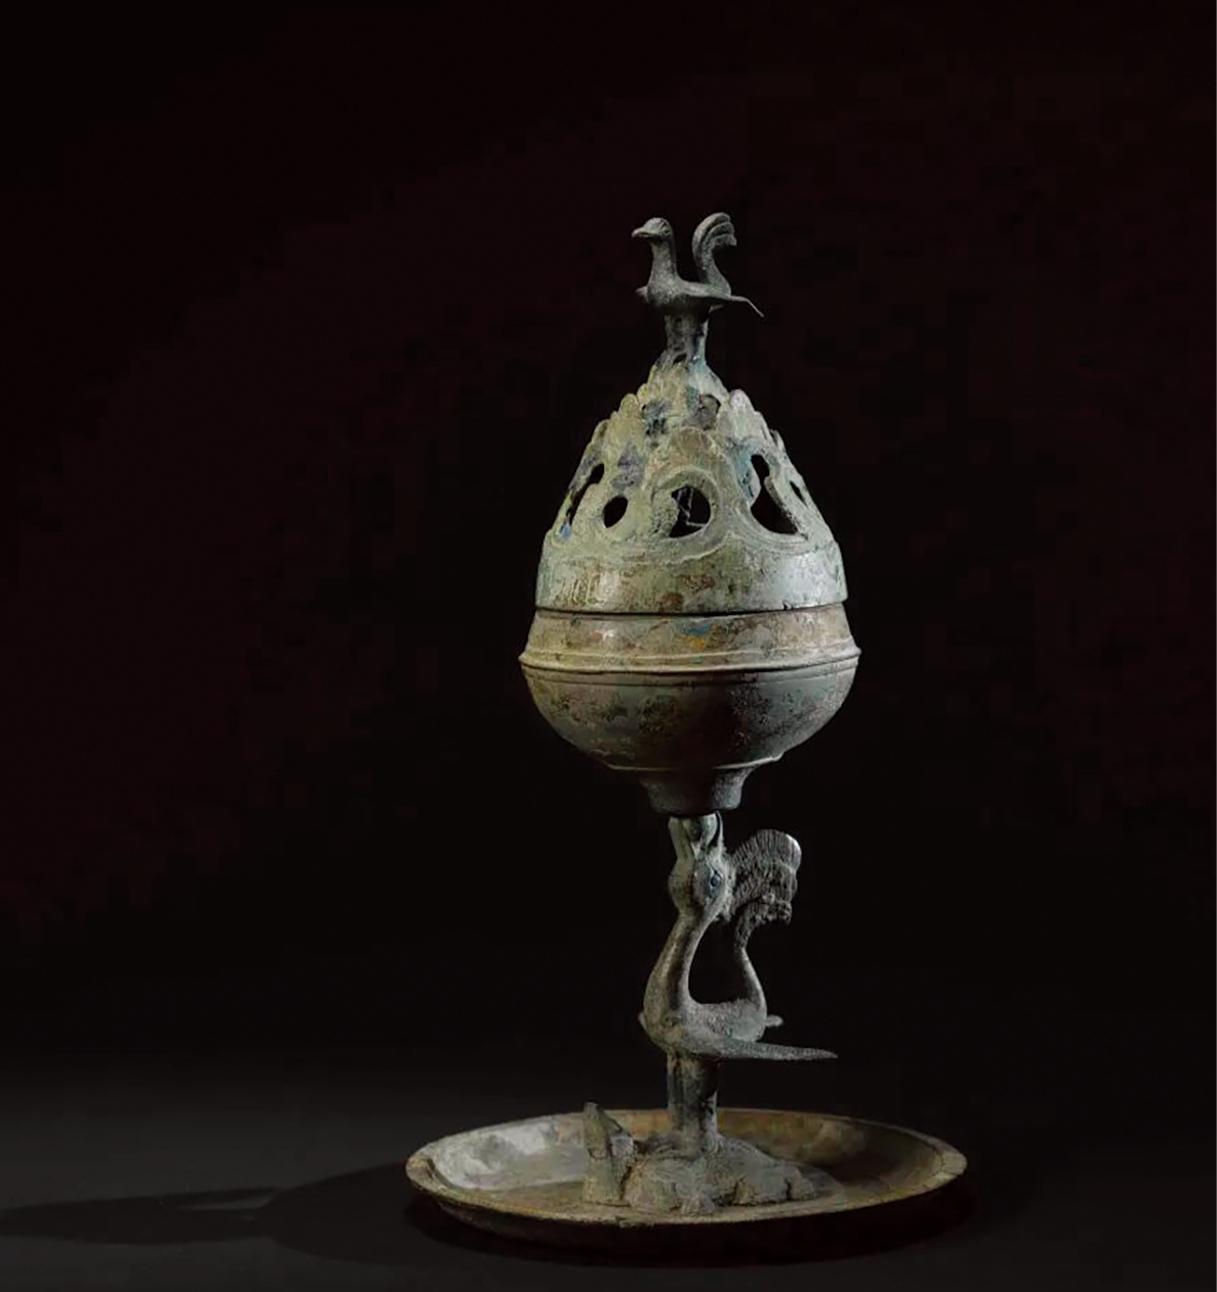 The inaugural Chinese Culture Festival will be held from June to September. Photo shows a Hill censer with a phoenix-and-turtle stand to be exhibited at "The Hong Kong Jockey Club Series: Fragrance of Time - In Search of Chinese Art of Scent" Exhibition.